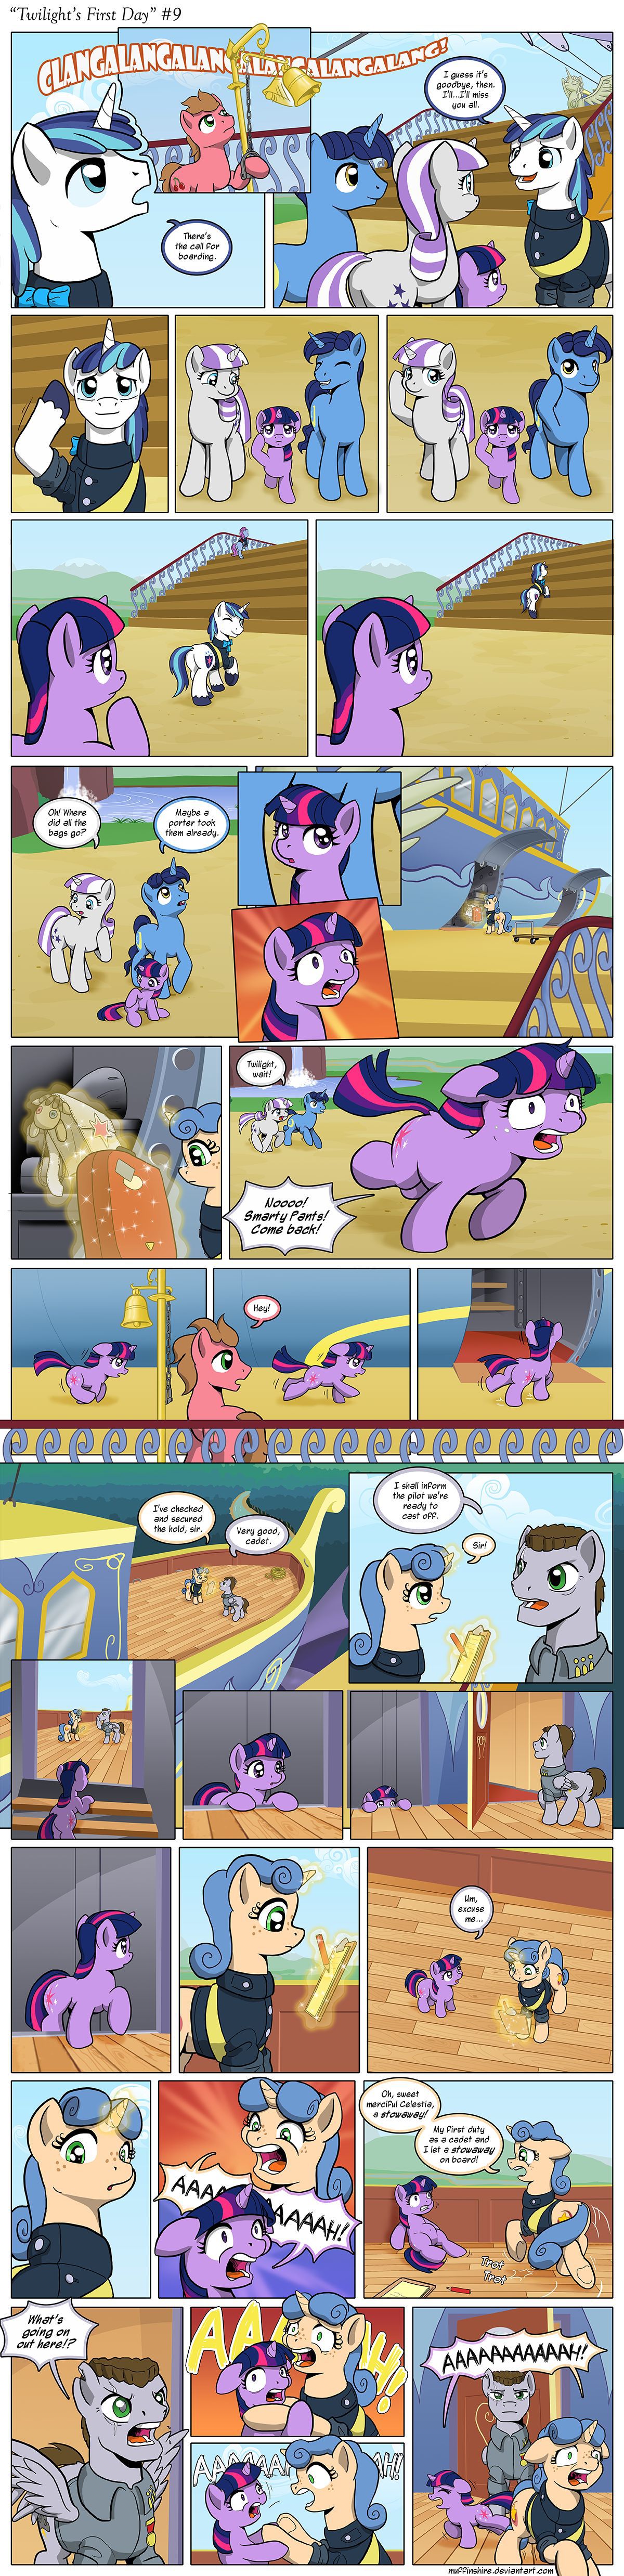 [Muffinshire] Twilight's First Day (My Little Pony: Friendship is Magic) [English] 9